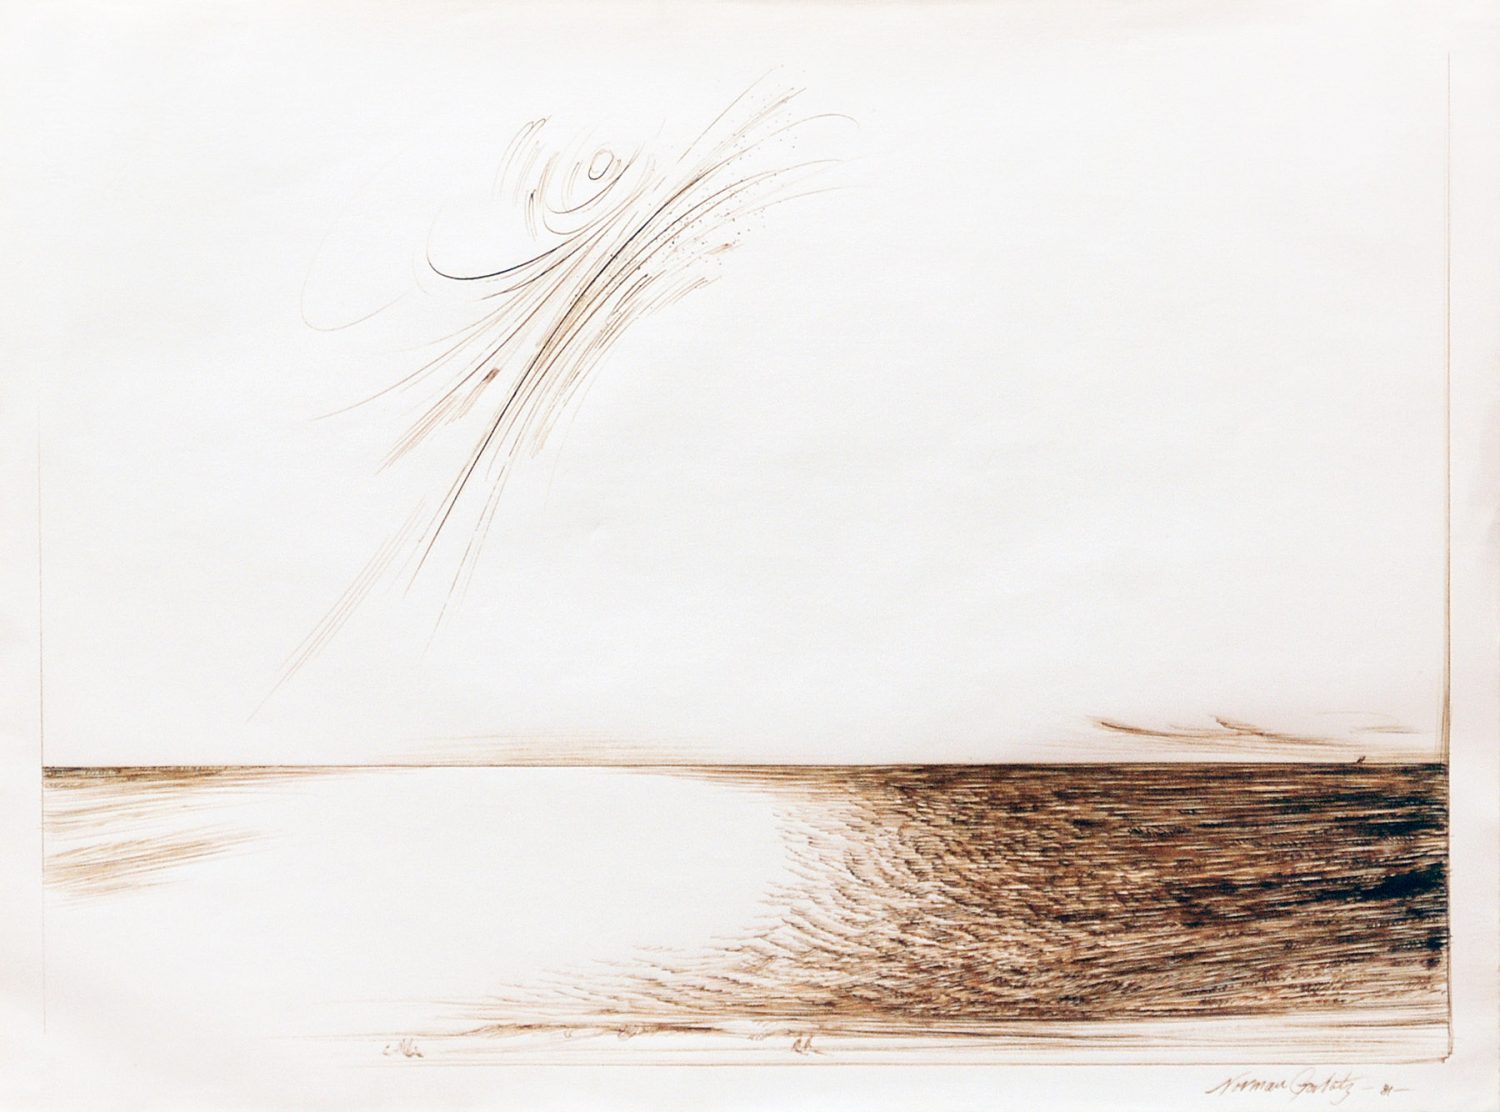 thumbnail of Reflection by American artist Norman Gorbaty. medium: ink on paper. date: 1981. dimensions: 16 x 21 inches